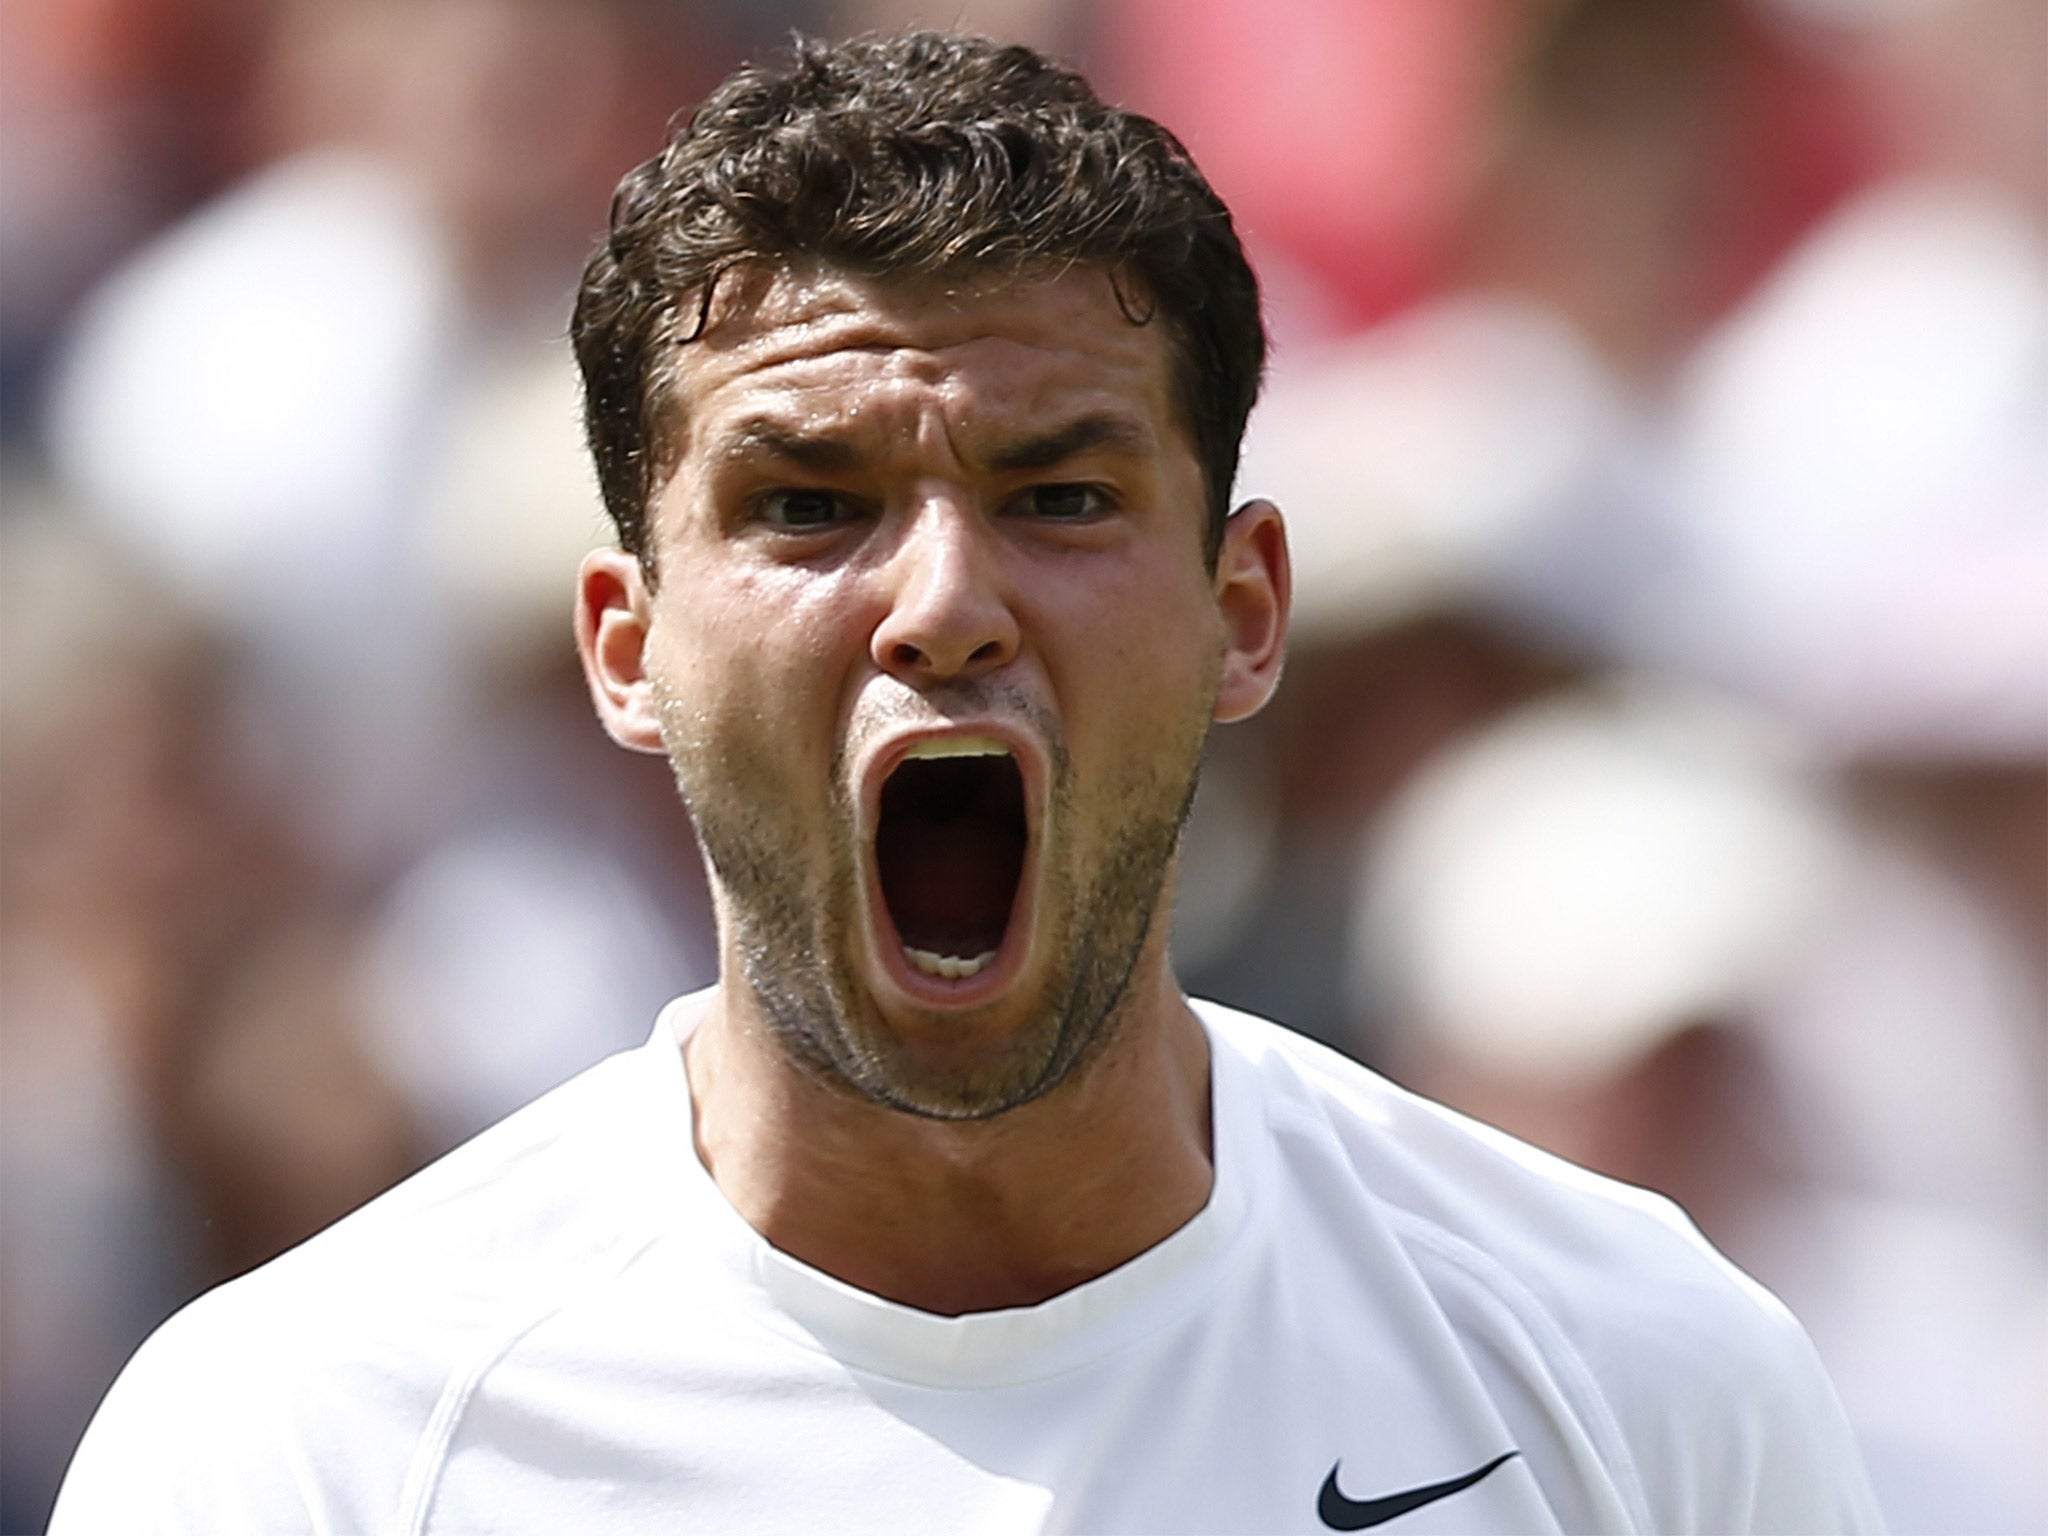 Grigor Dimitrov swept Murray aside with suprising ease